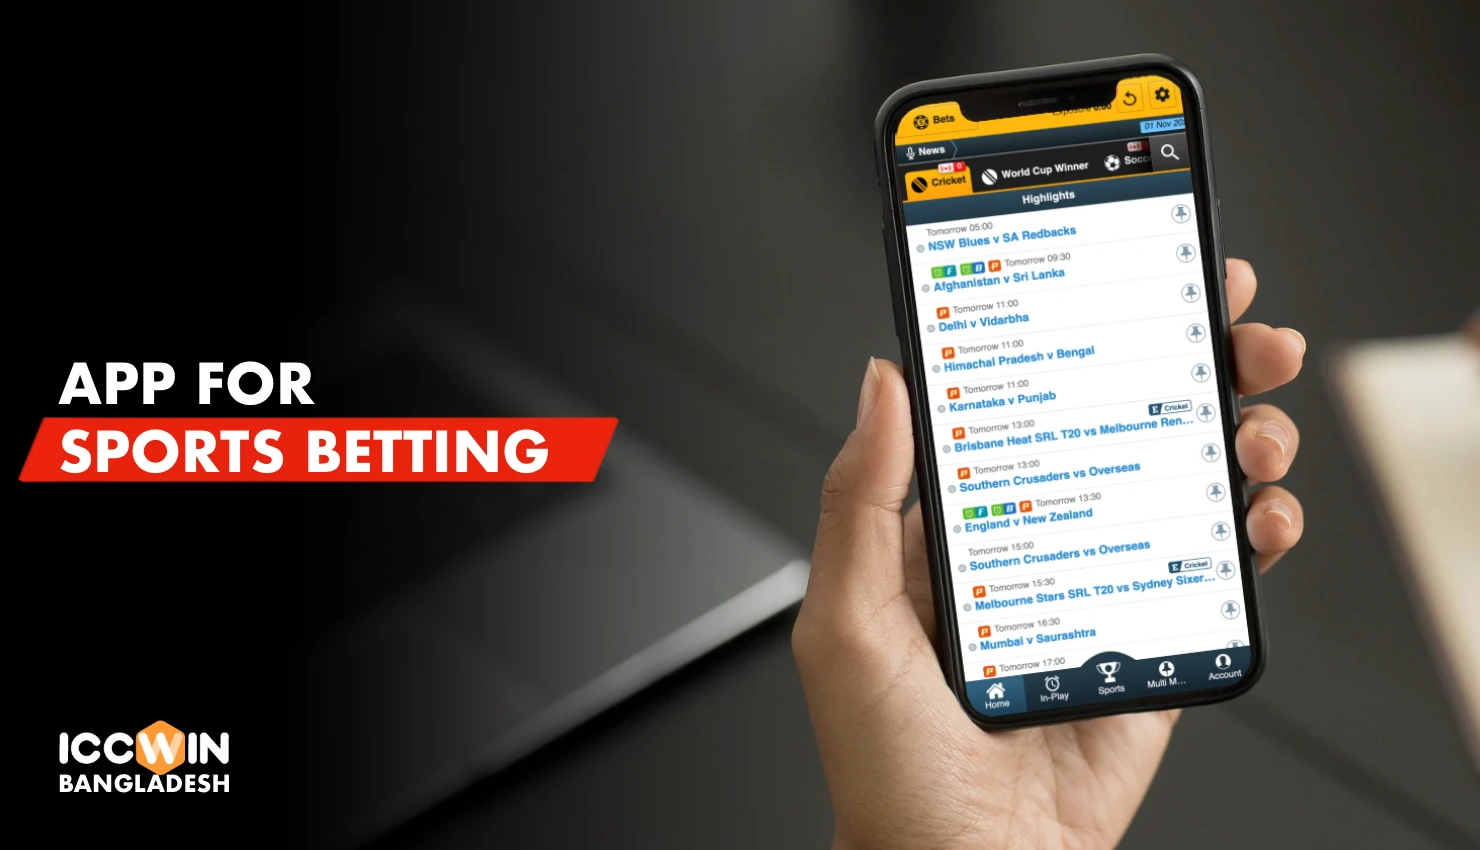 In the Iccwin mobile app you can bet on popular sports, including eSports